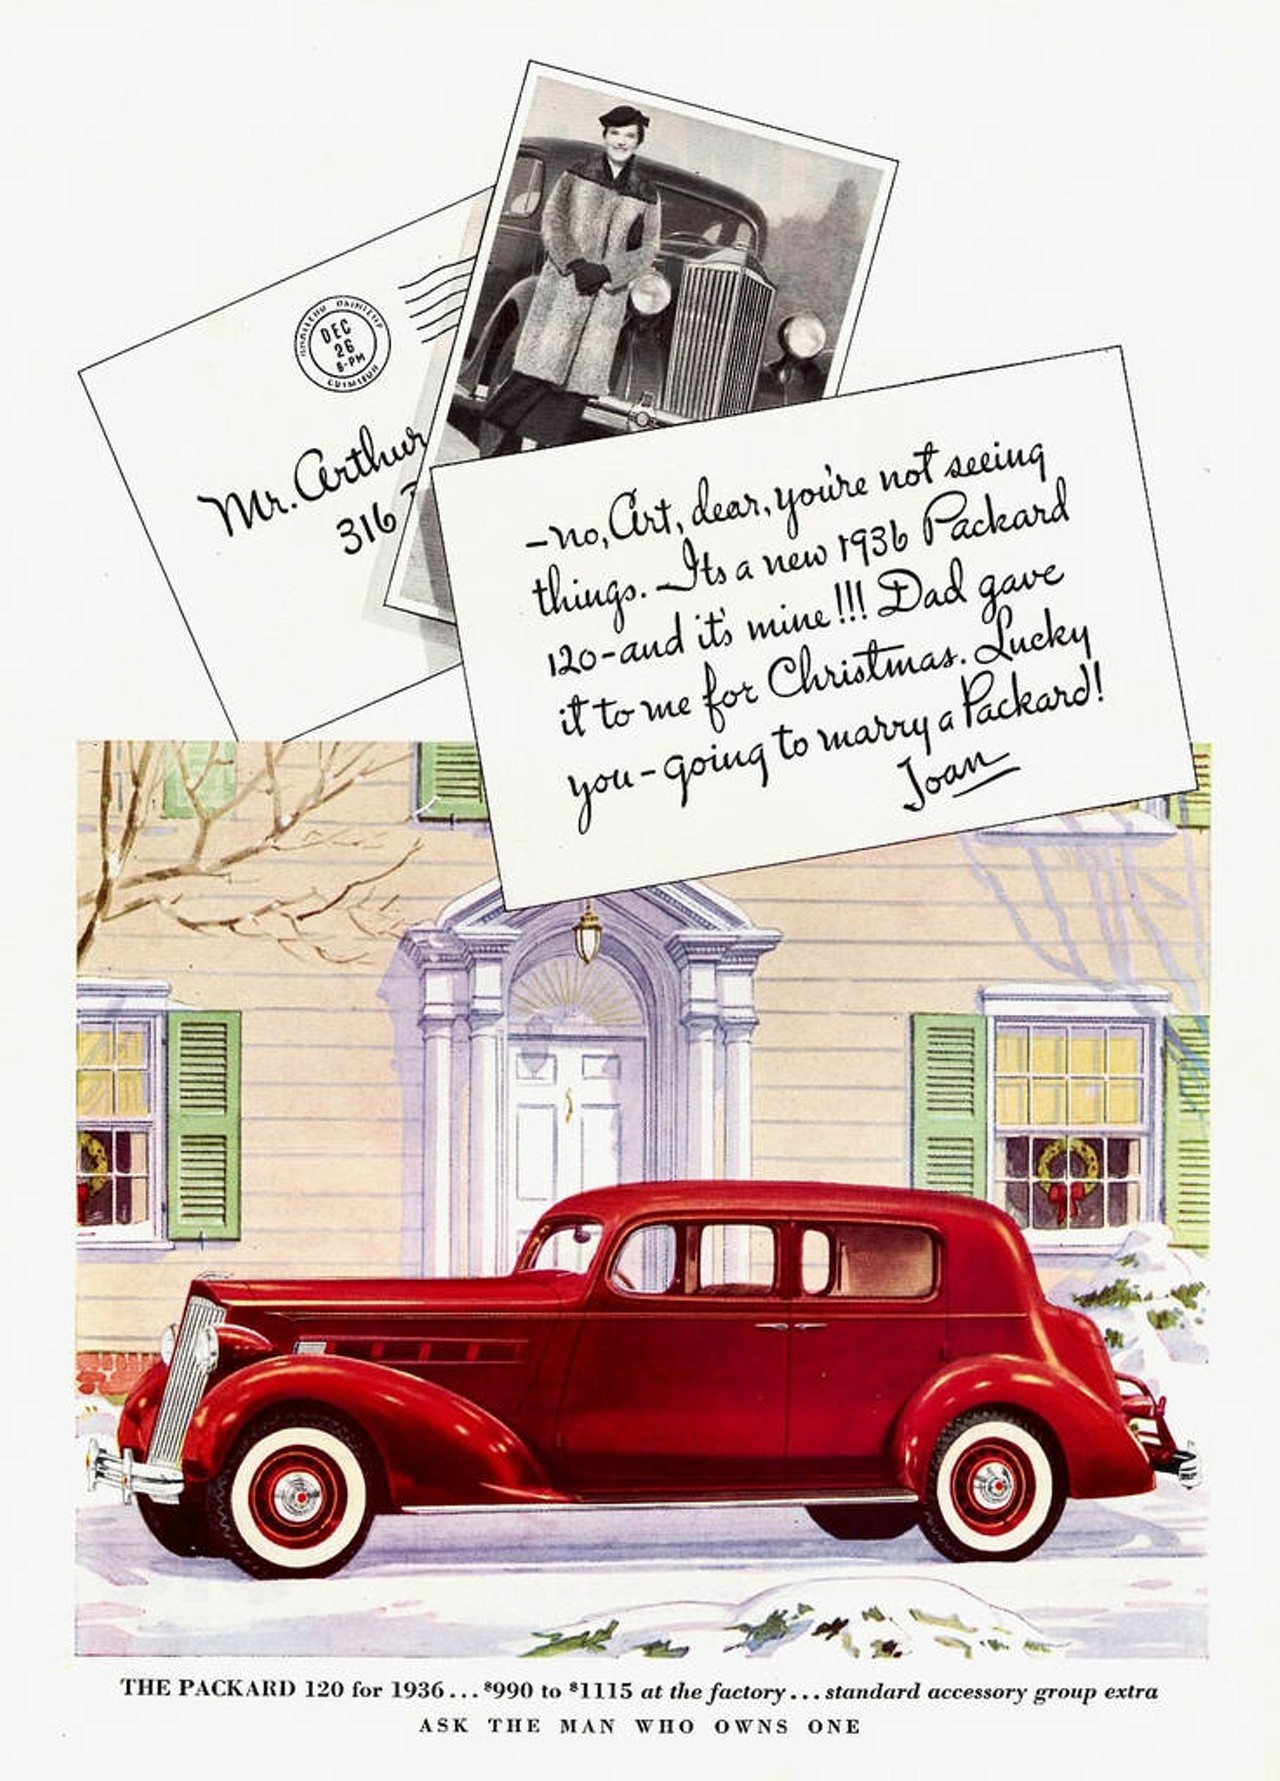 Packard 120 Club Sedan, 1936 (Image courtesy of Alden Jewell, Flickr Creative Commons)